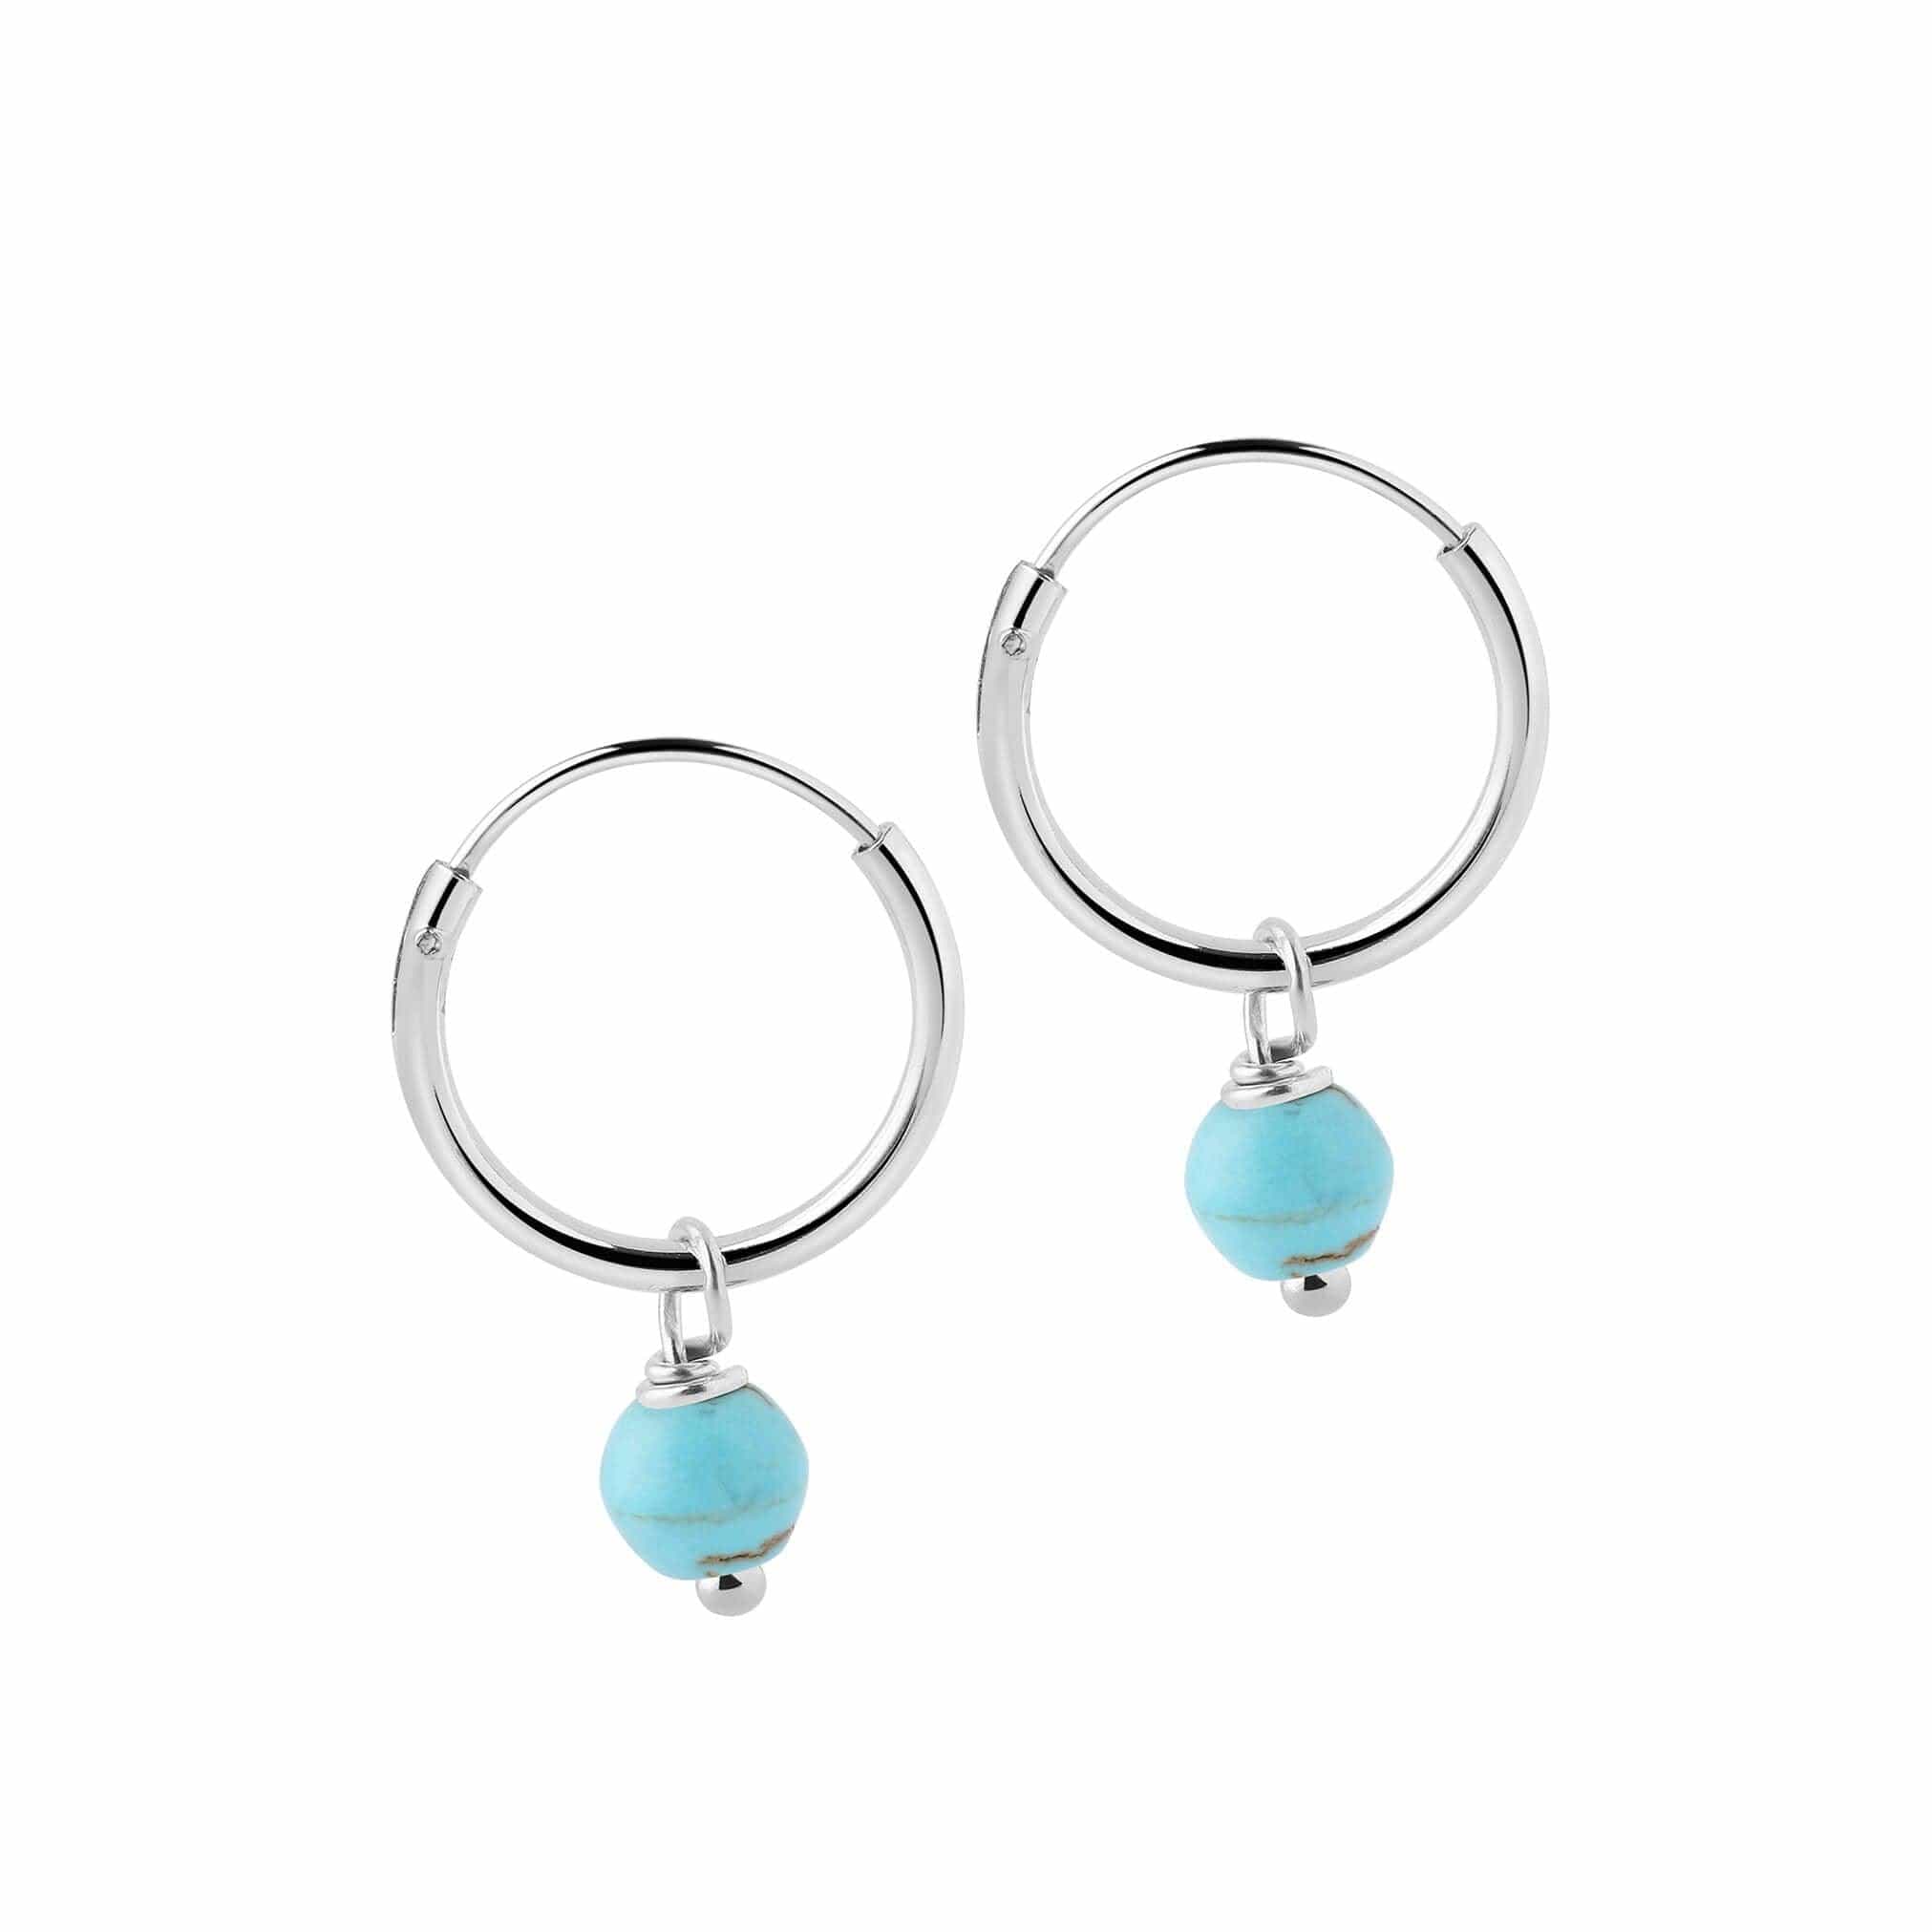 Small Silver Hoop Earrings Turquoise Blue Stone